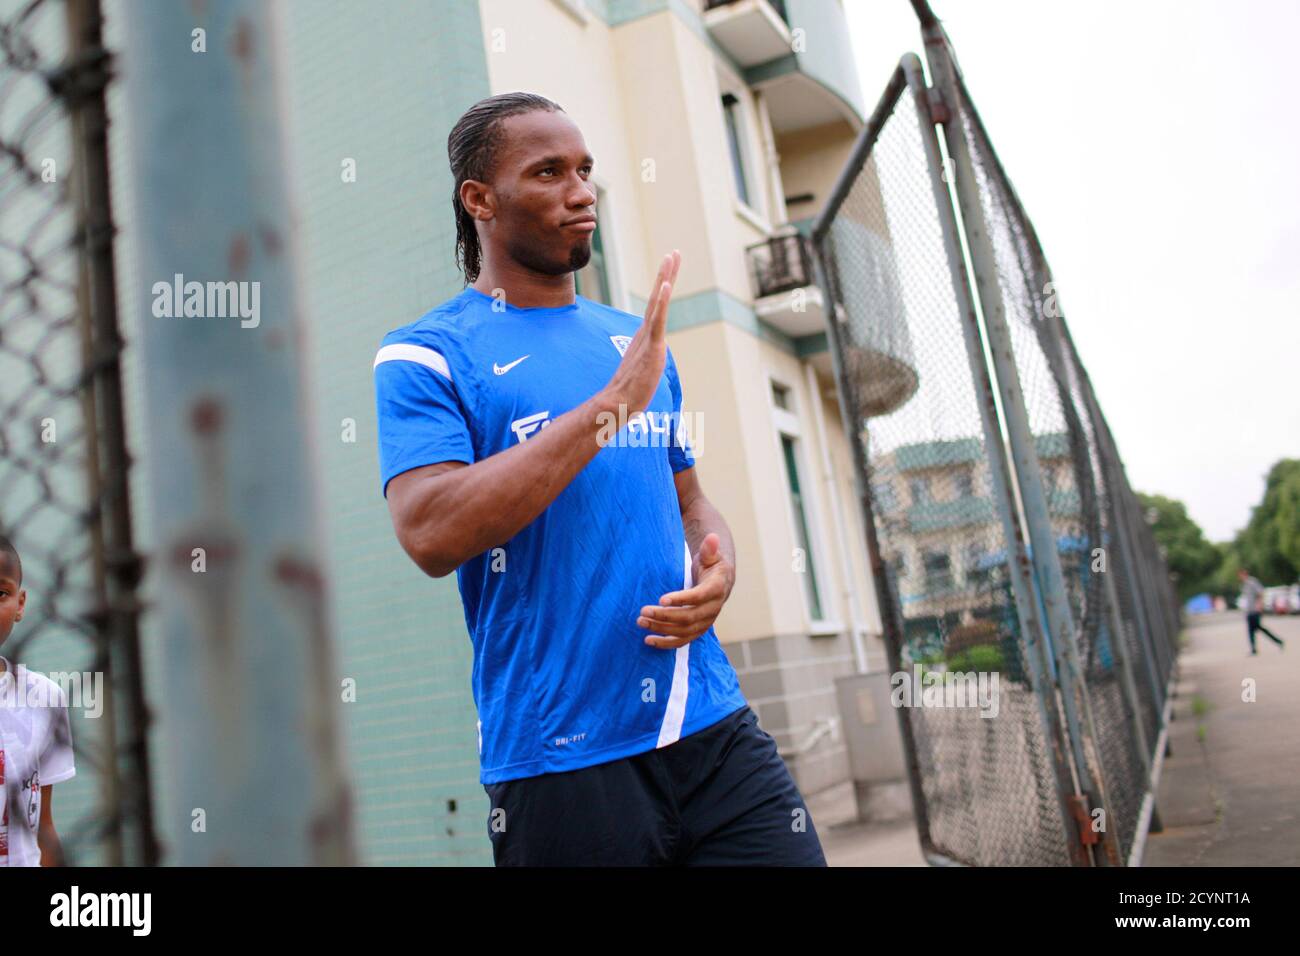 Shanghai Shenhua striker Didier Drogba of Ivory Coast attends a training session in Shanghai July 16, 2012. Drogba has signed a two-and-a-half-year contract with the big-spending Chinese Super League club for a reported salary of $300,000 a week, ending weeks of speculation on his future after he announced his decision to leave Champions League winners Chelsea. REUTERS/Aly Song (CHINA - Tags: SPORT SOCCER) Stock Photo